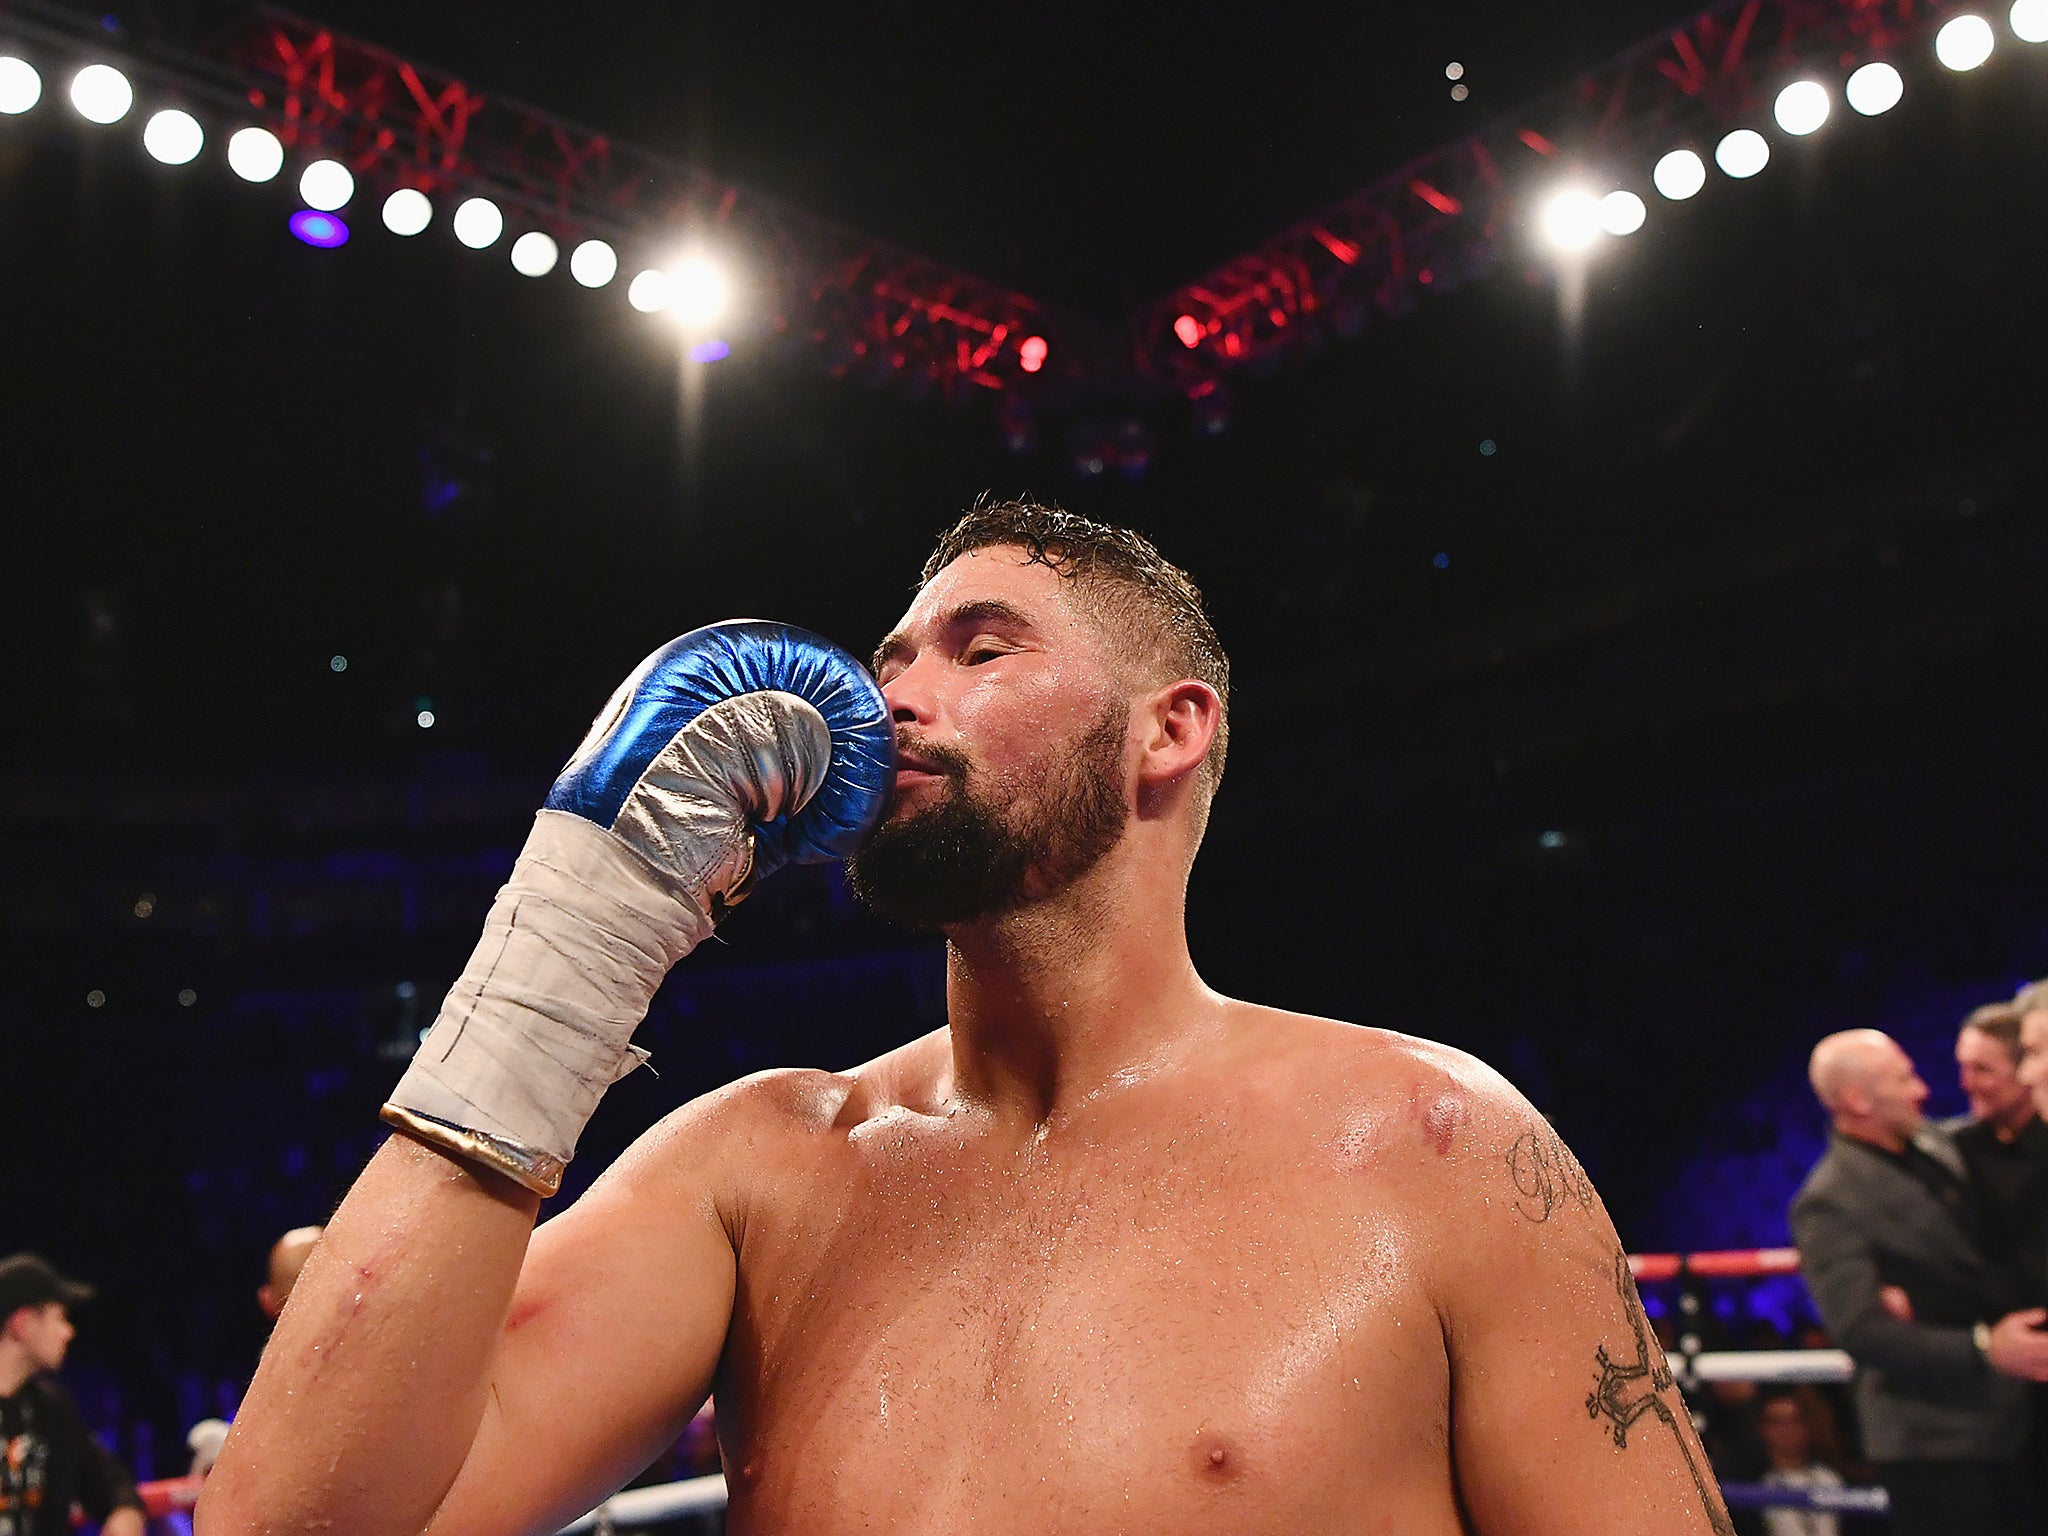 Haye’s rival and fellow boxer Tony Bellew was brought up during the incident, the court heard